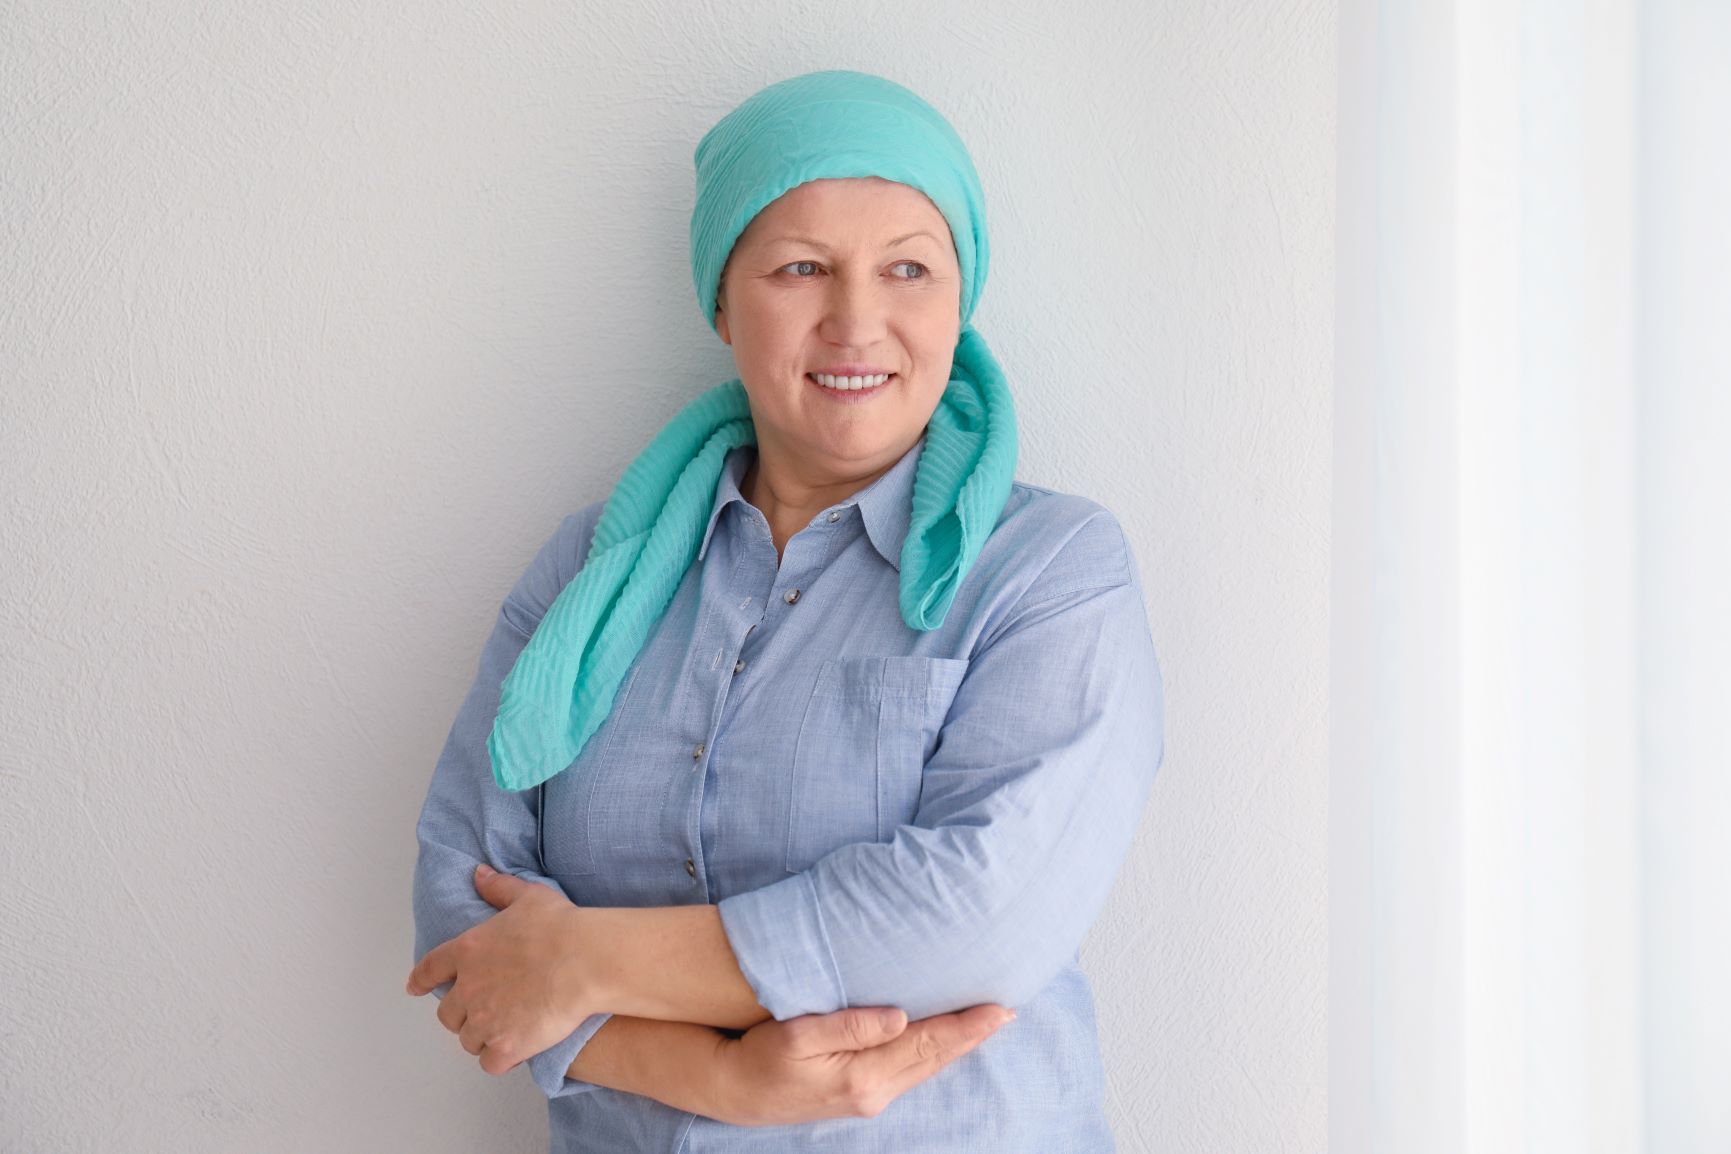 Cancer patient seeking oncodermatology services